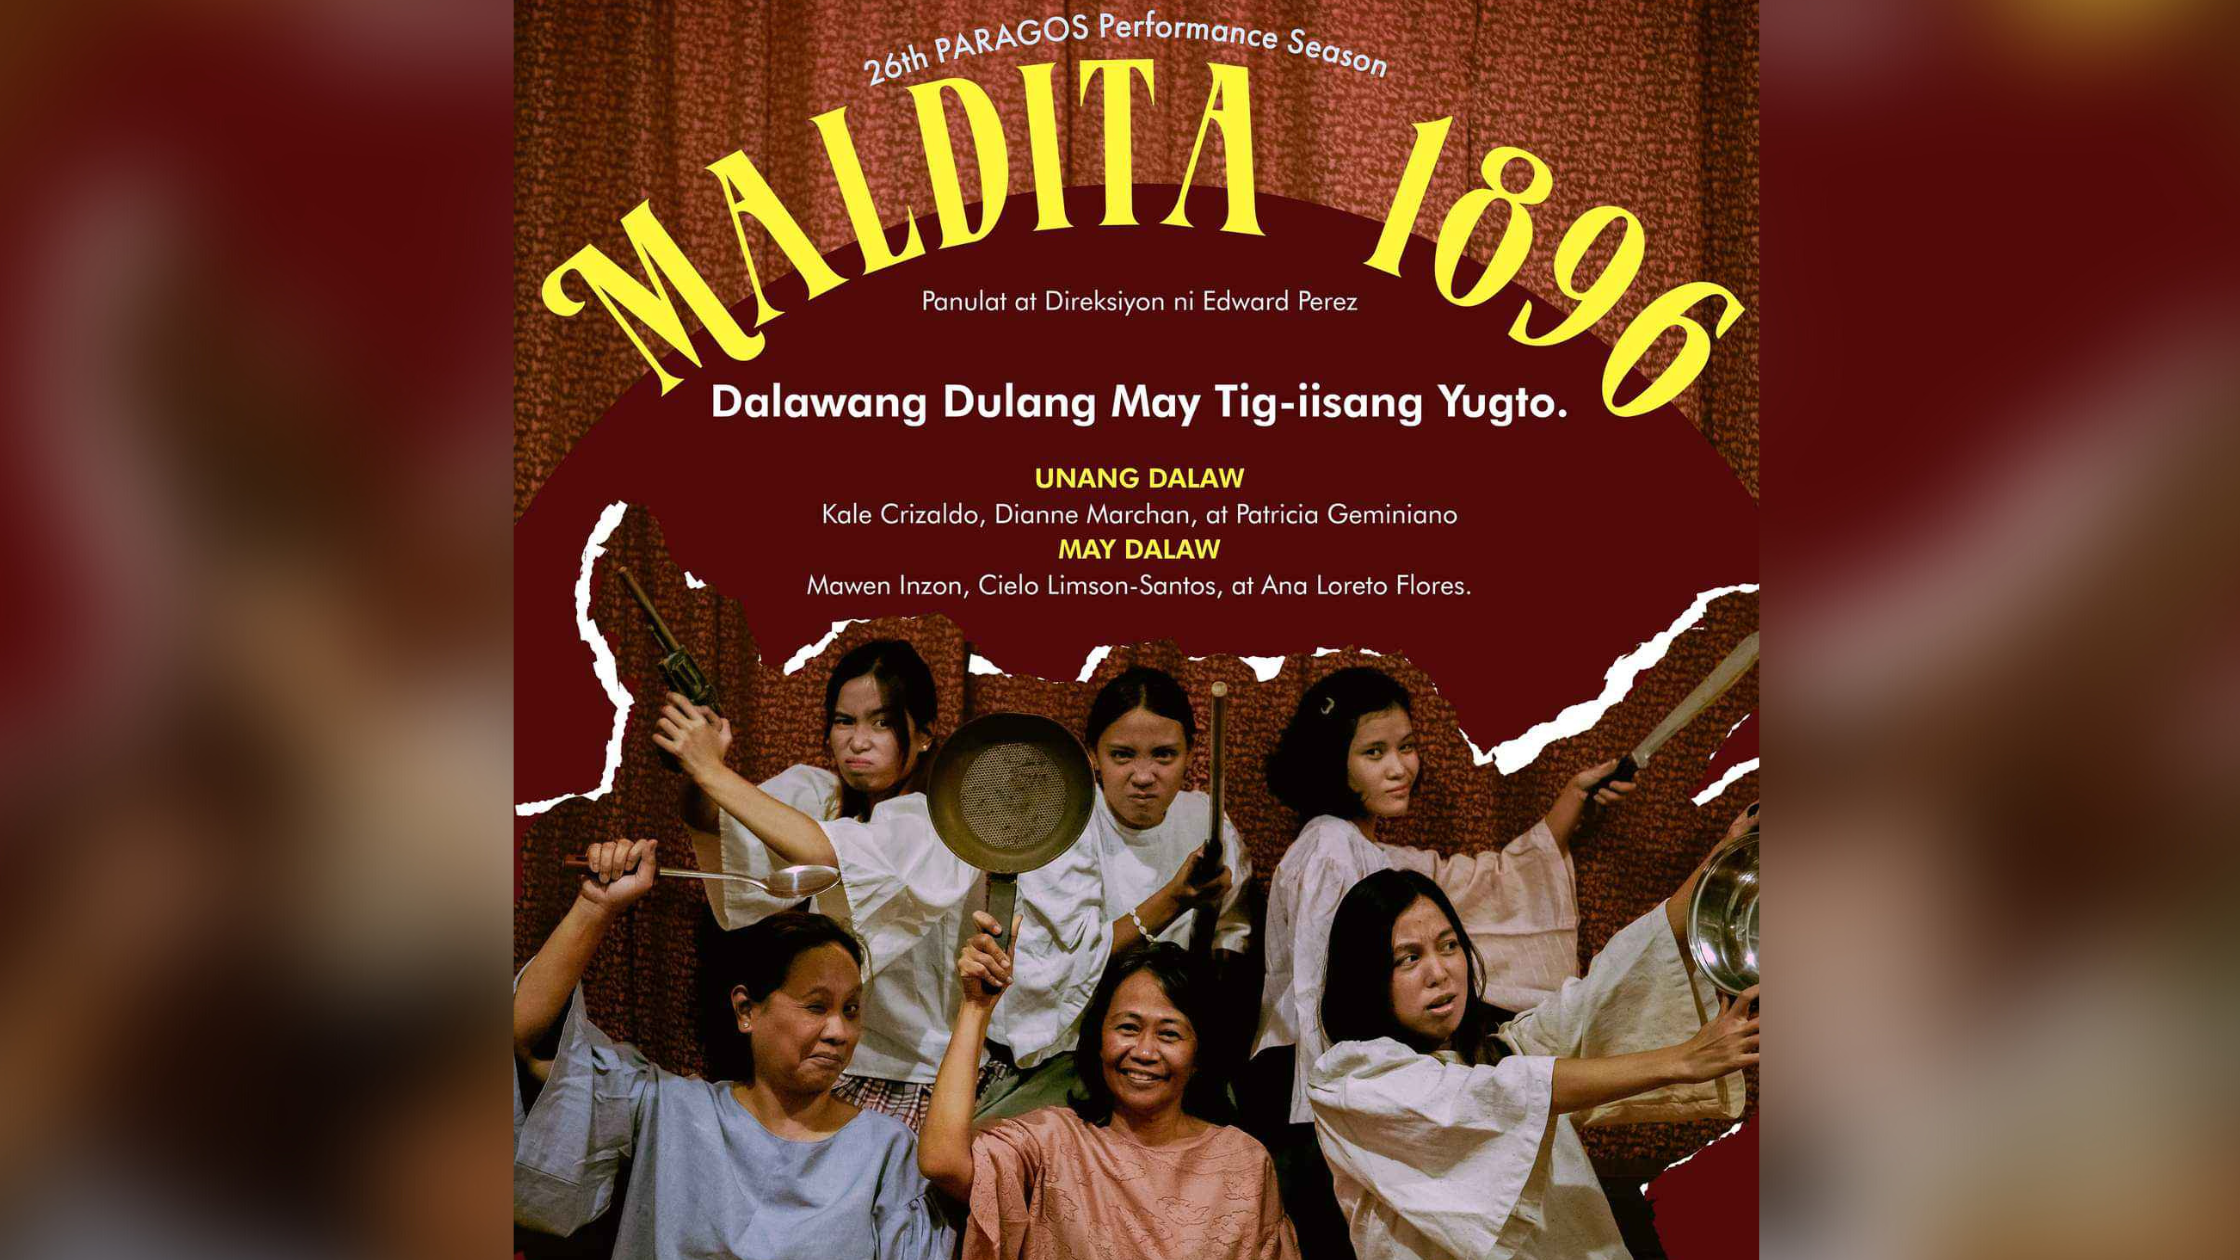 ‘Maldita 1896’ two women-centric plays to be staged